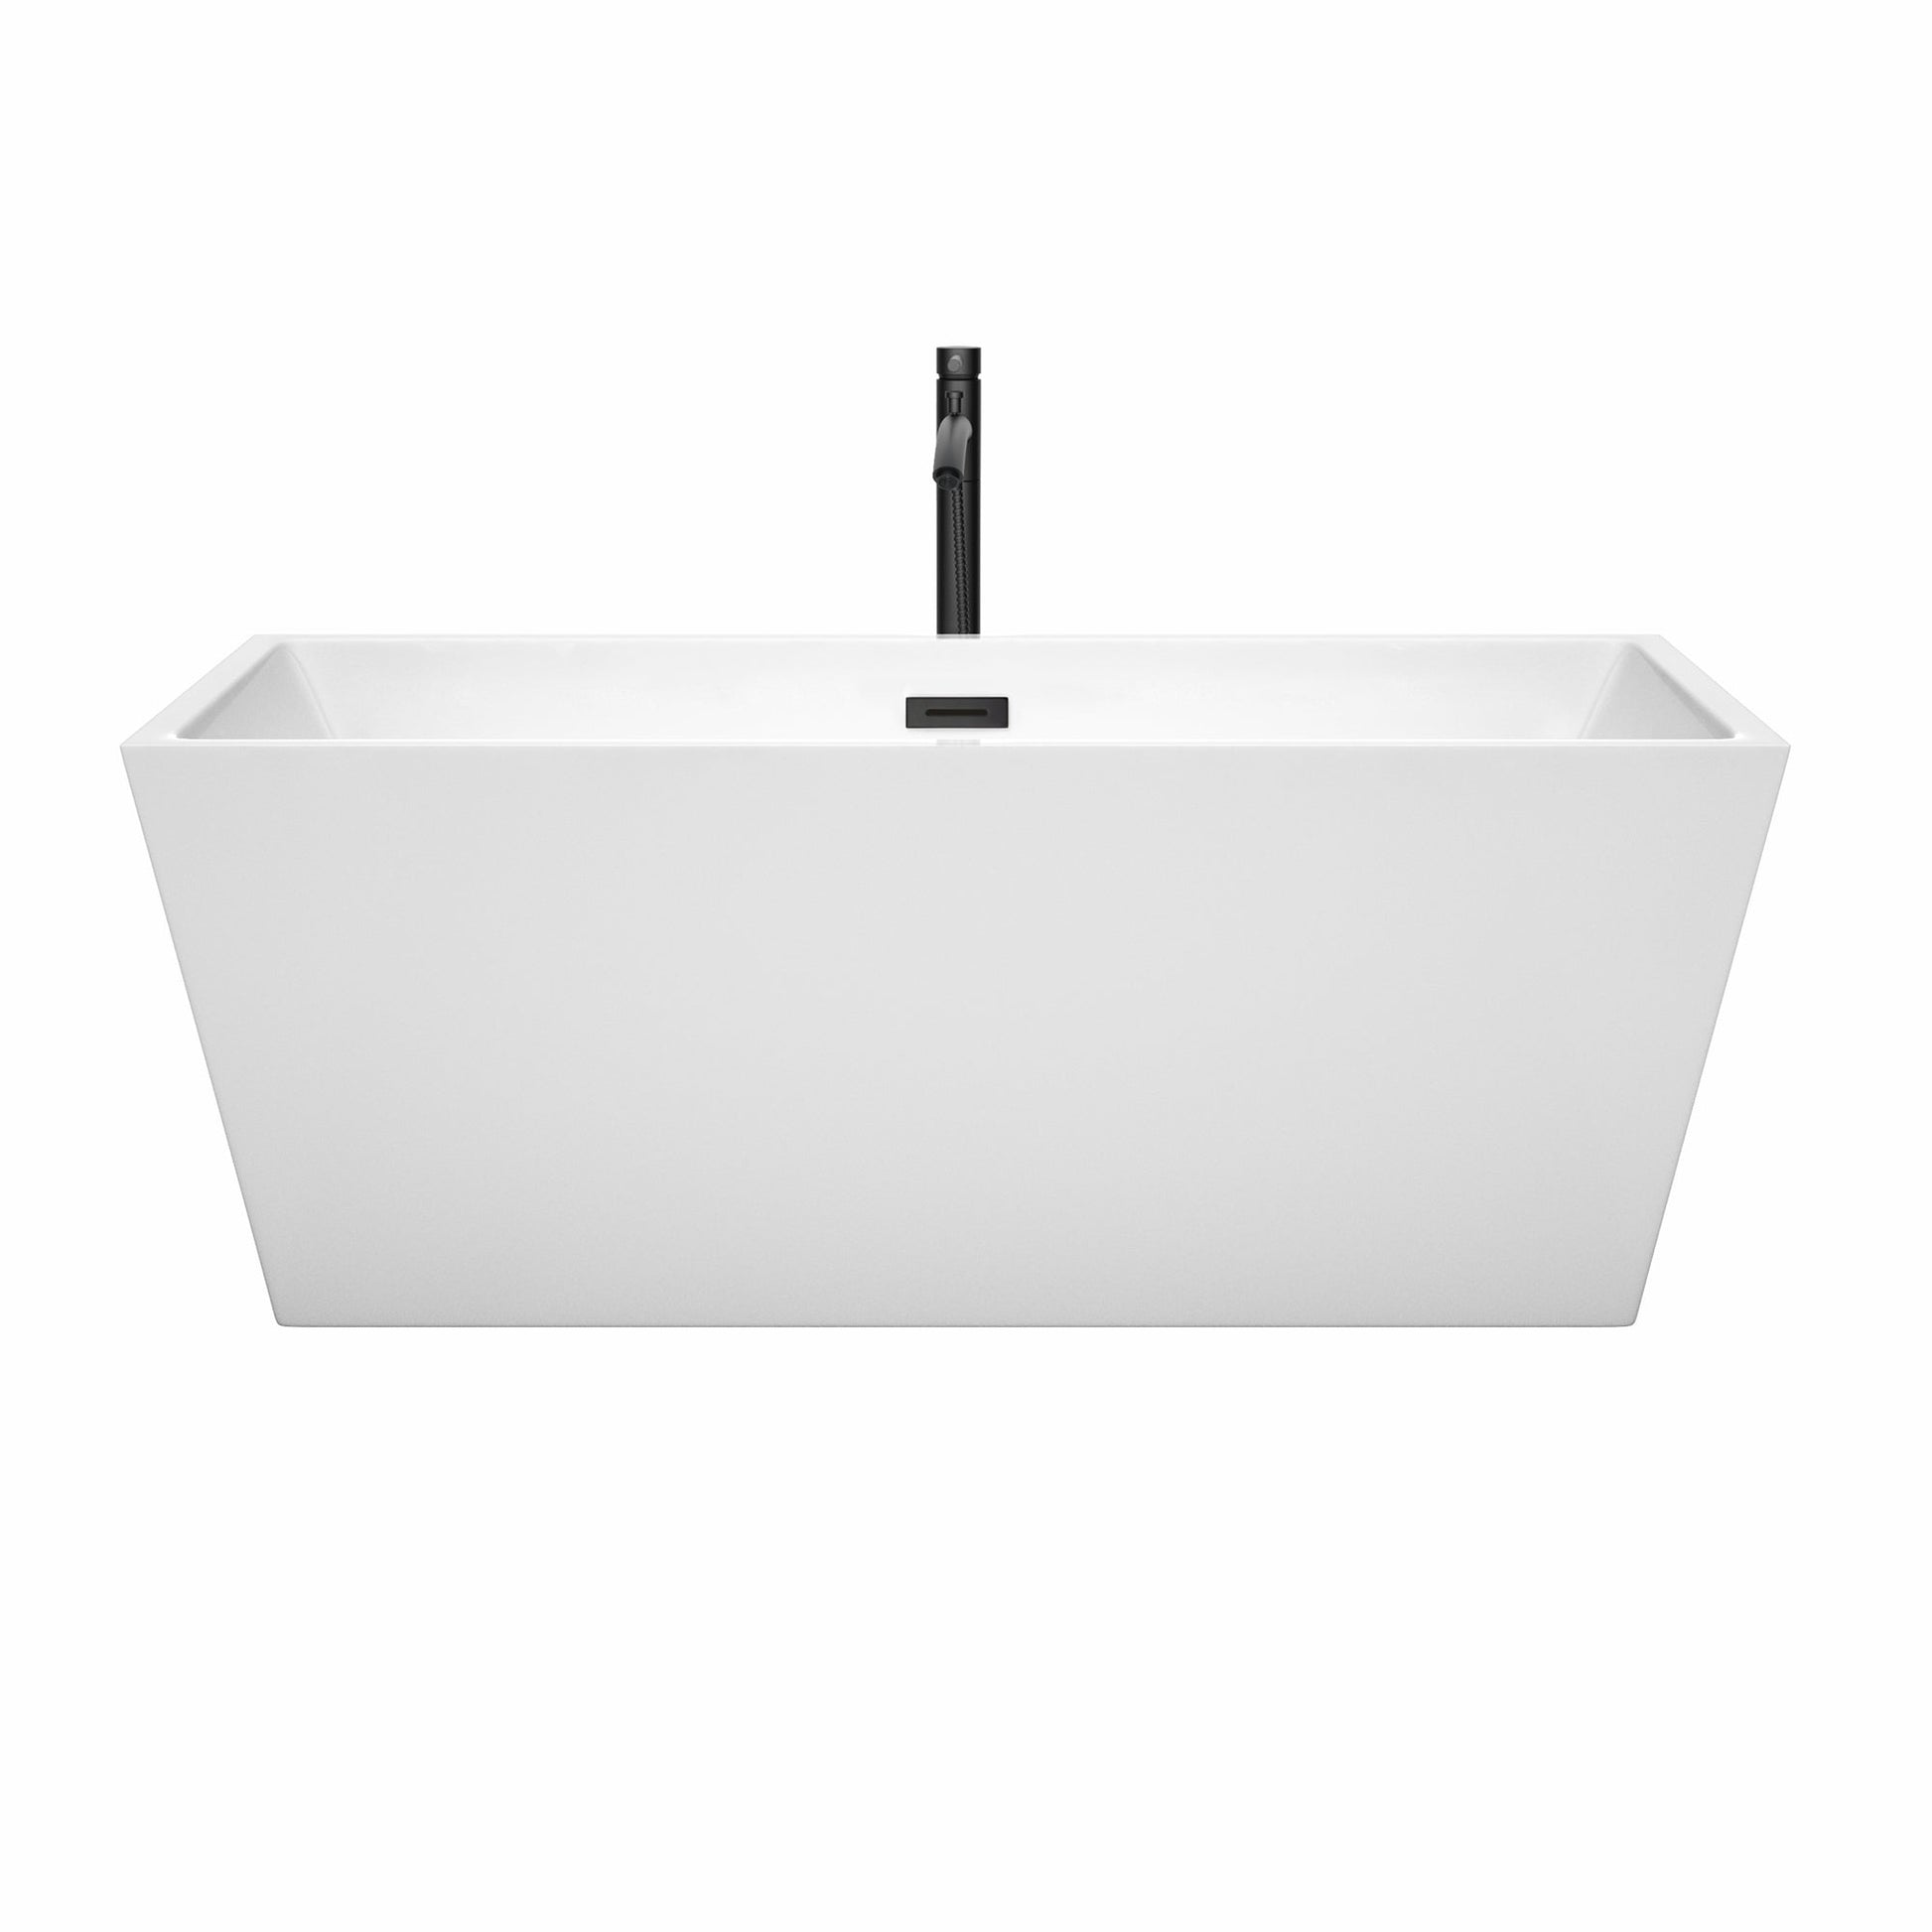 Wyndham Collection Sara 63" Freestanding Bathtub in White With Floor Mounted Faucet, Drain and Overflow Trim in Matte Black